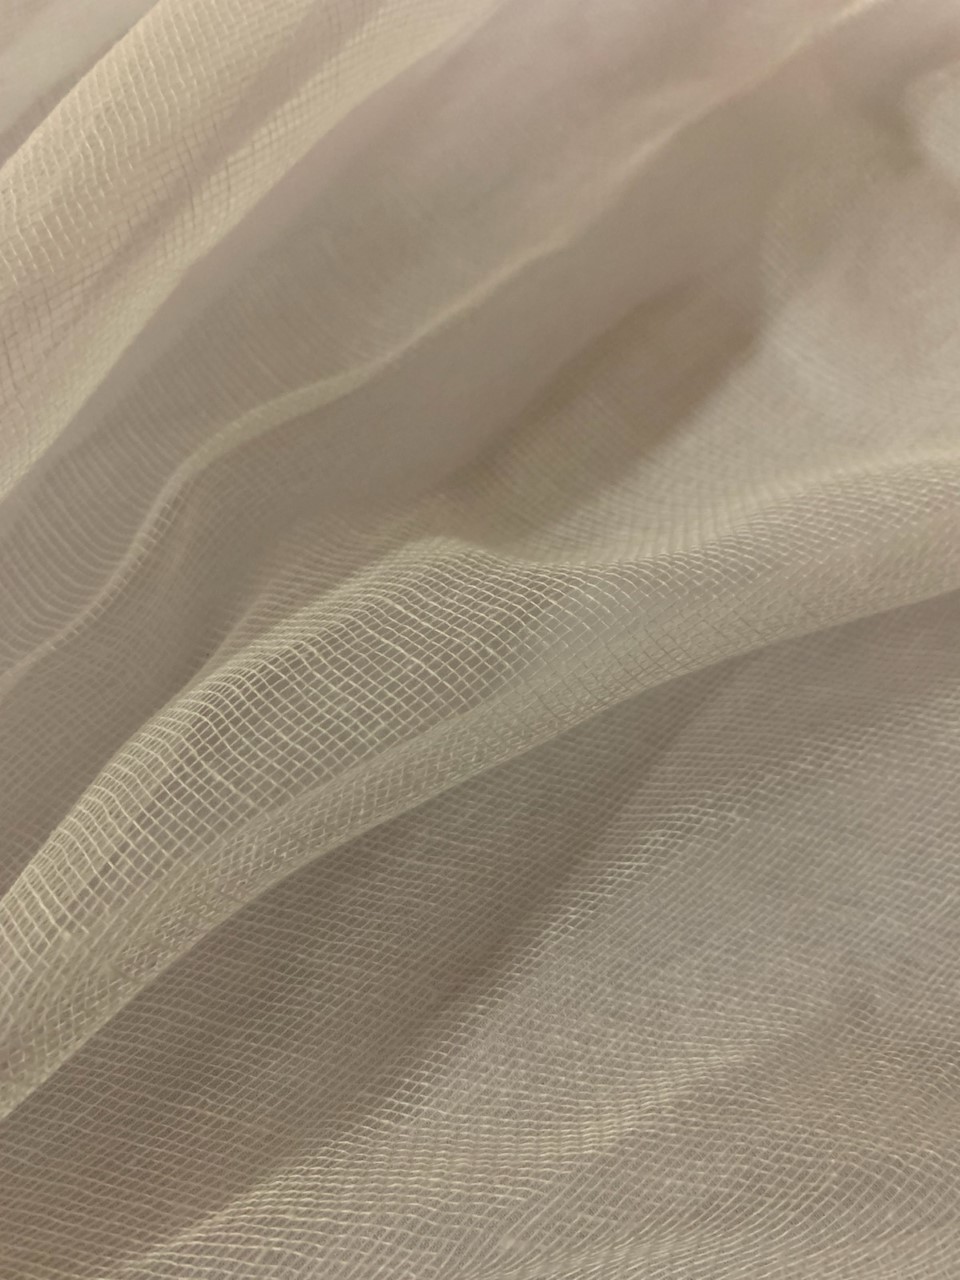 36" White Grade 40 Cheesecloth By The Yard